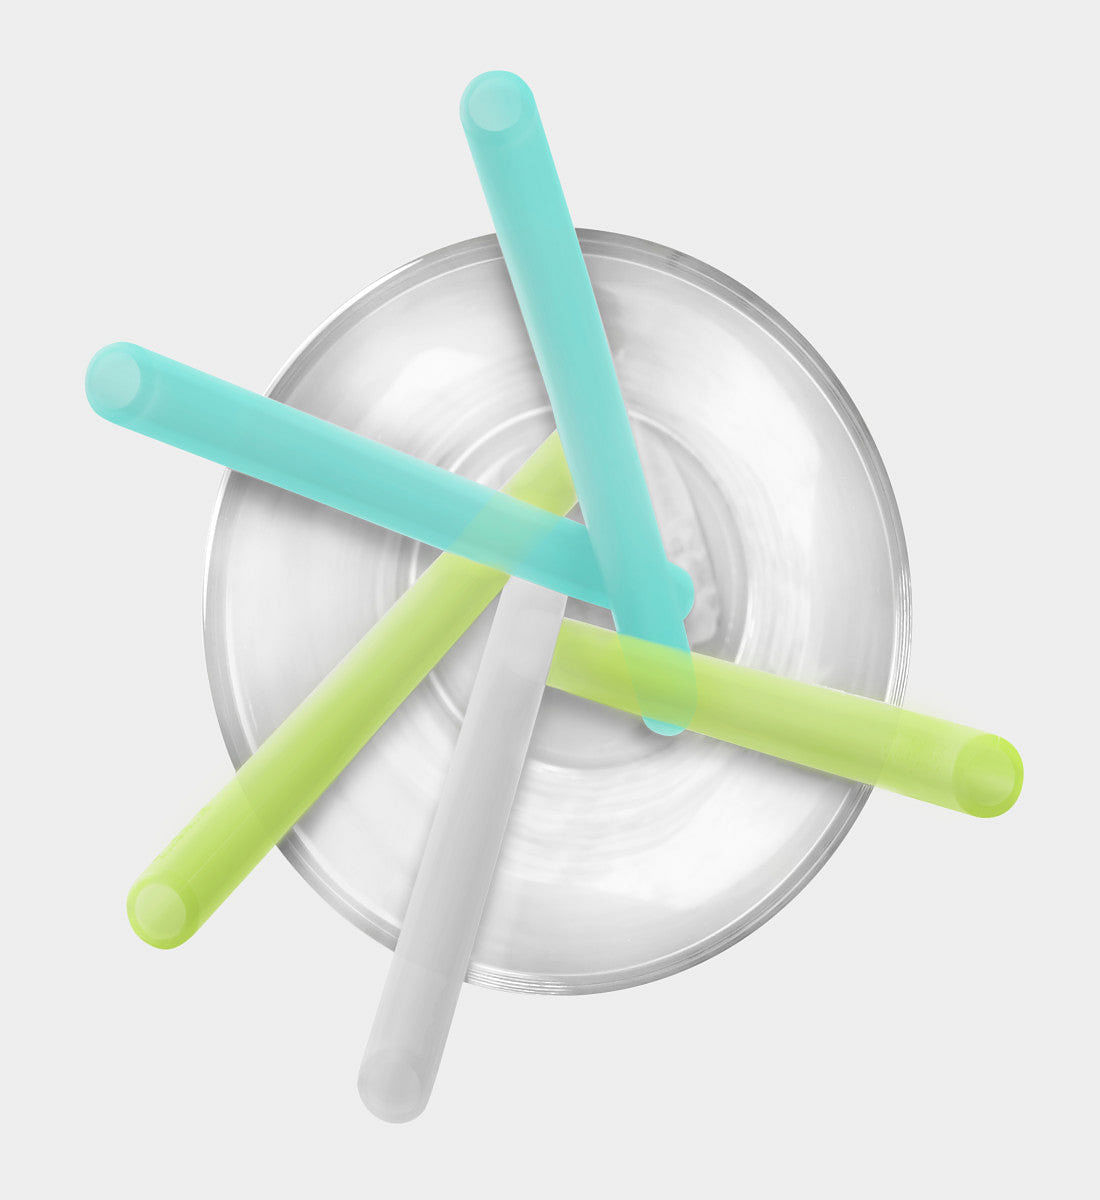 Silikids X-Wide Silicone Reusable Straws - Fog/Mint/Frost (3PK)